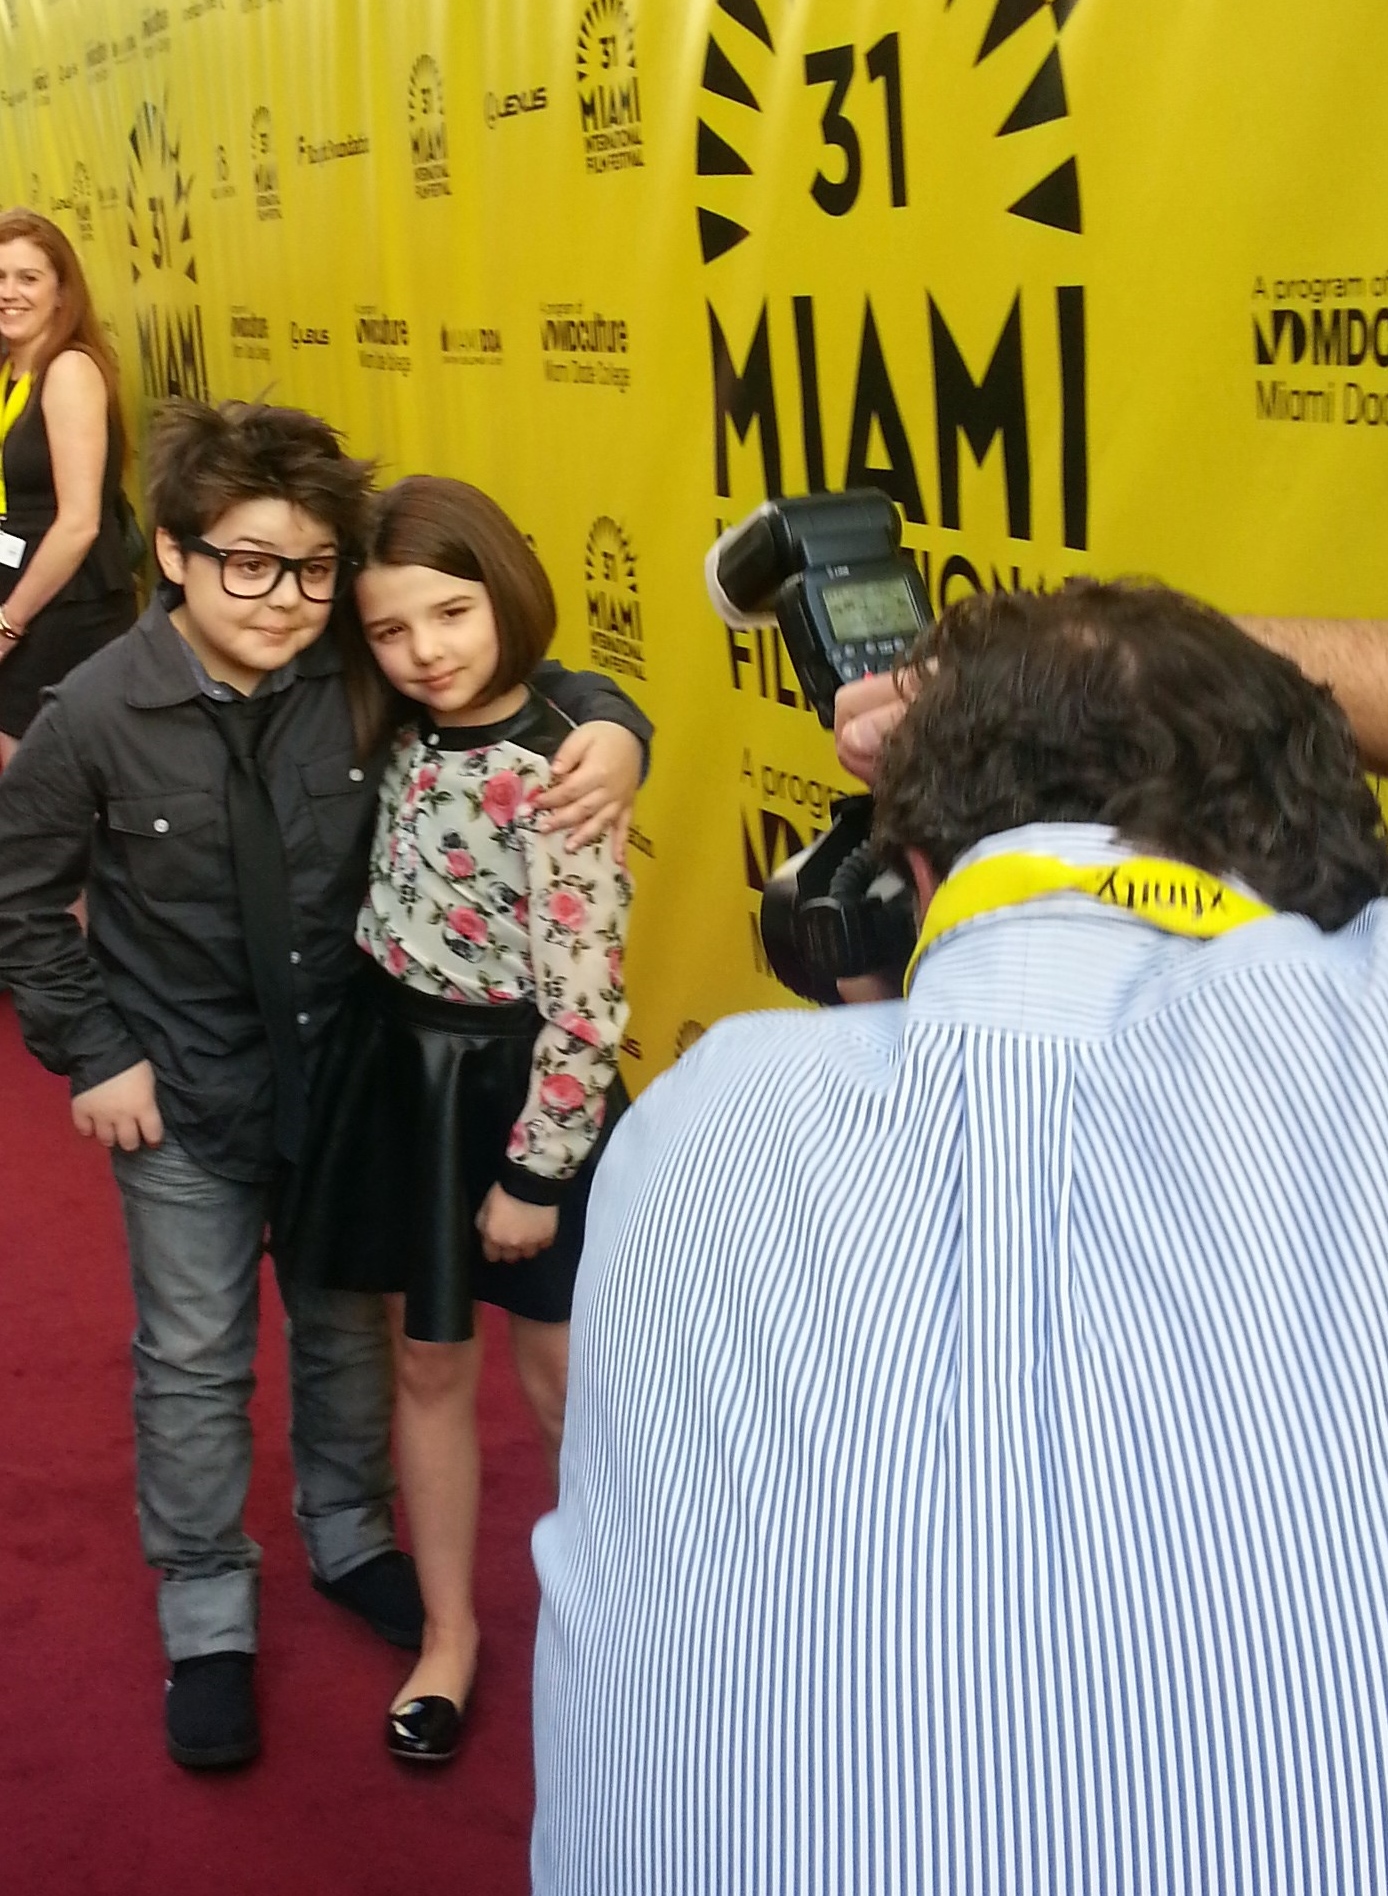 Lucy Fava alongside brother and fellow actor Luke Fava. Rob the Mob screening - Miami Film Festival 2014.